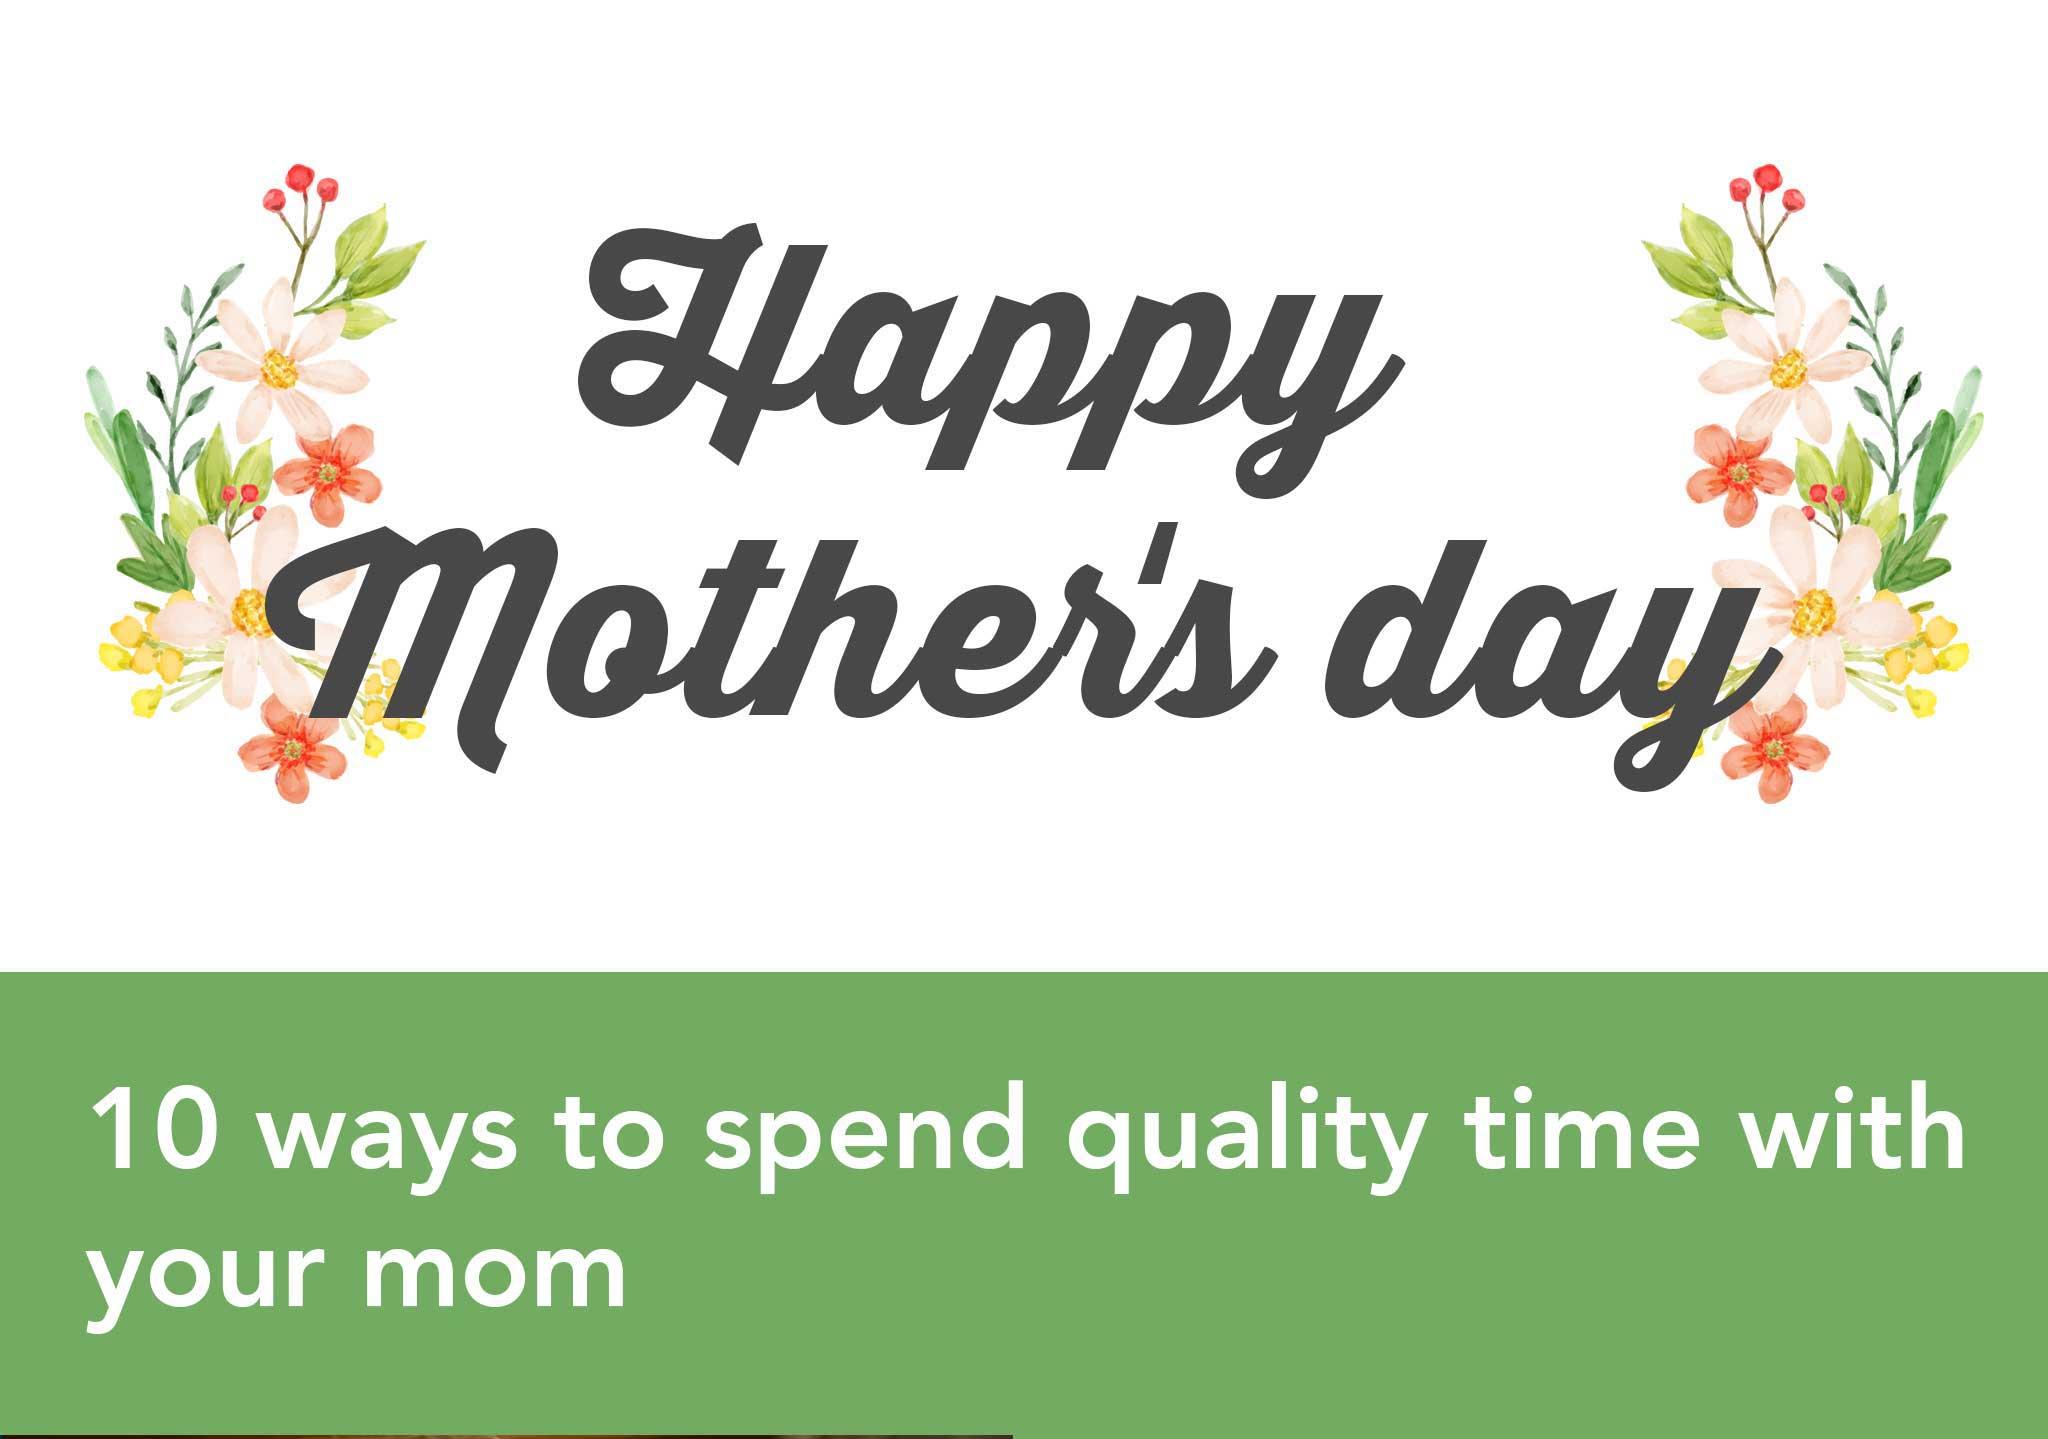 10 ways to spend quality time with your mom